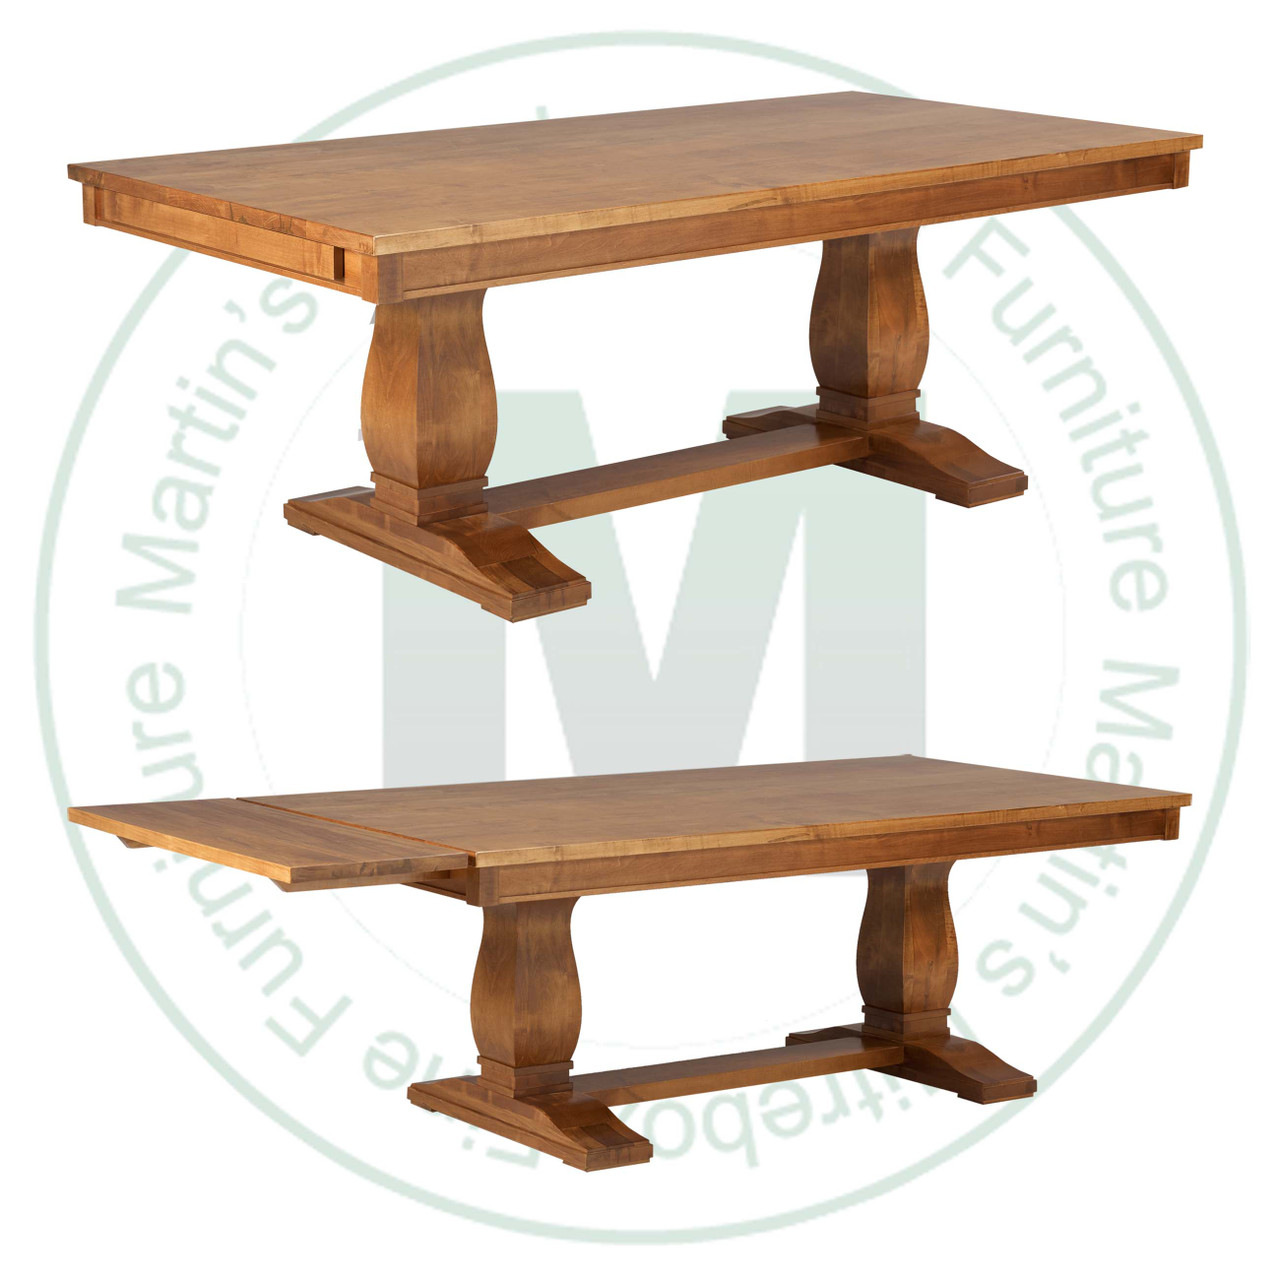 Maple Madrid Solid Top Double Pedestal Table 48''D x 108''W x 30''H With 2 - 16'' Leaves On End Table Has 1'' Thick Top